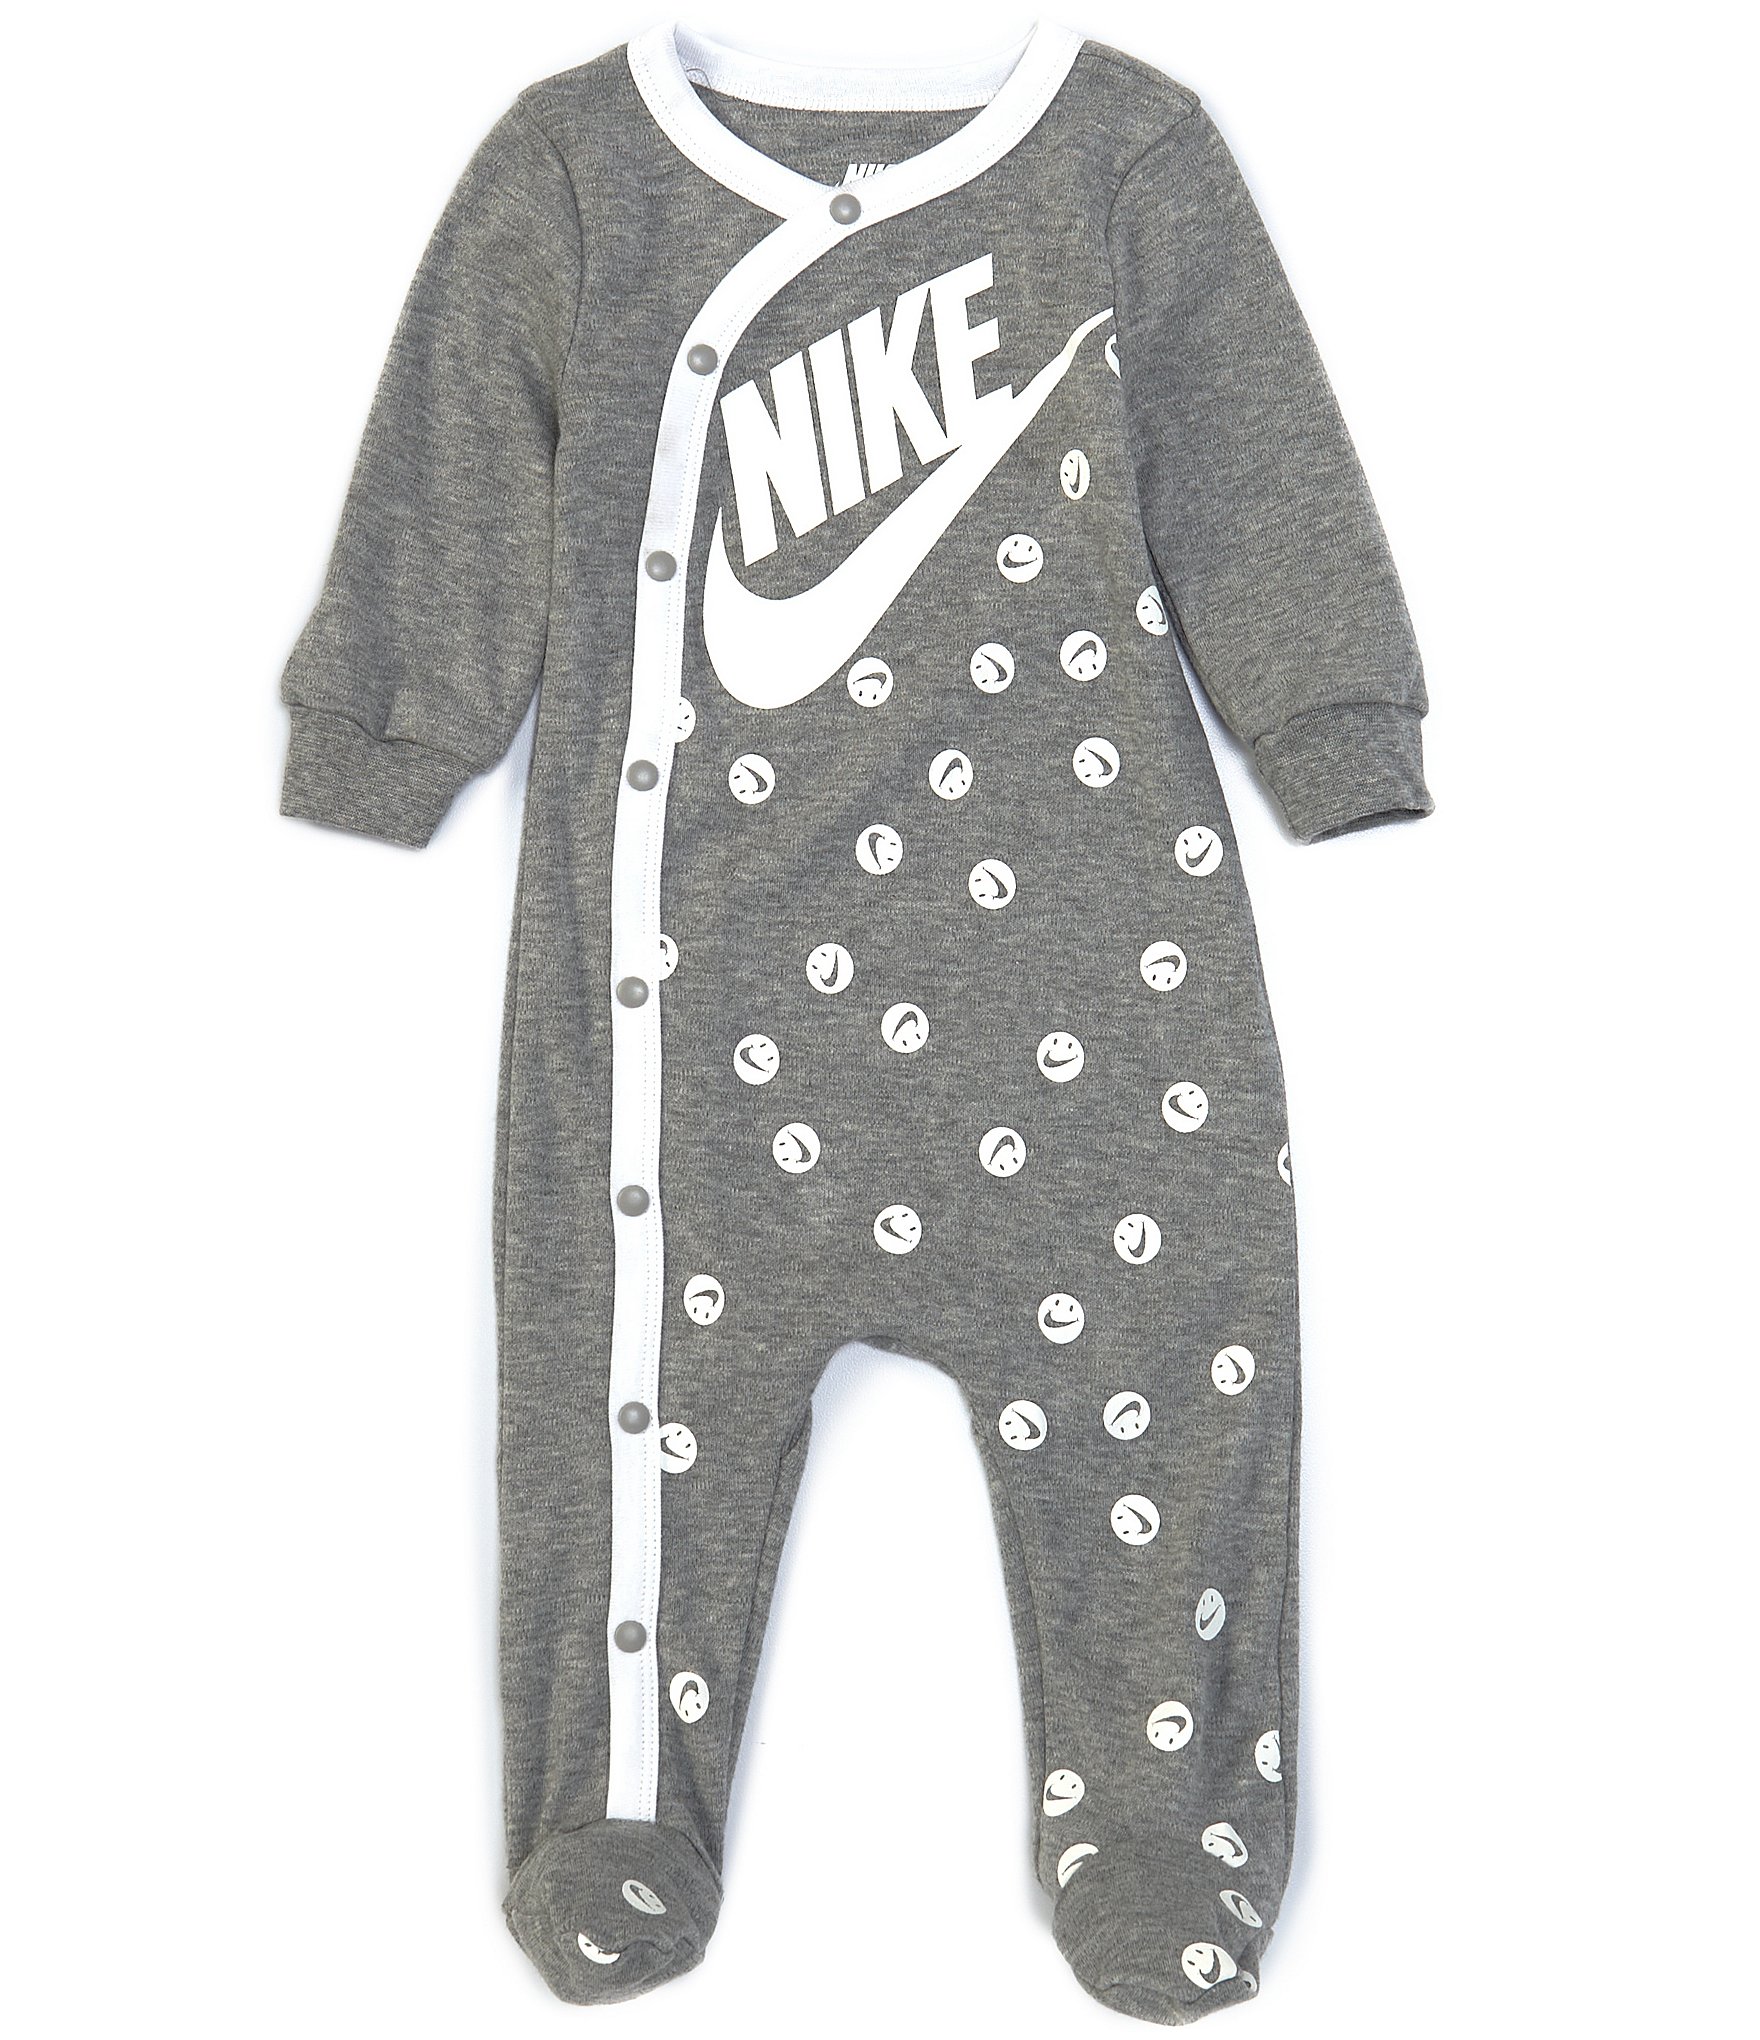 Nike Baby Girls Newborn-9 Months Long-Sleeve Smiley Footed Coverall ...